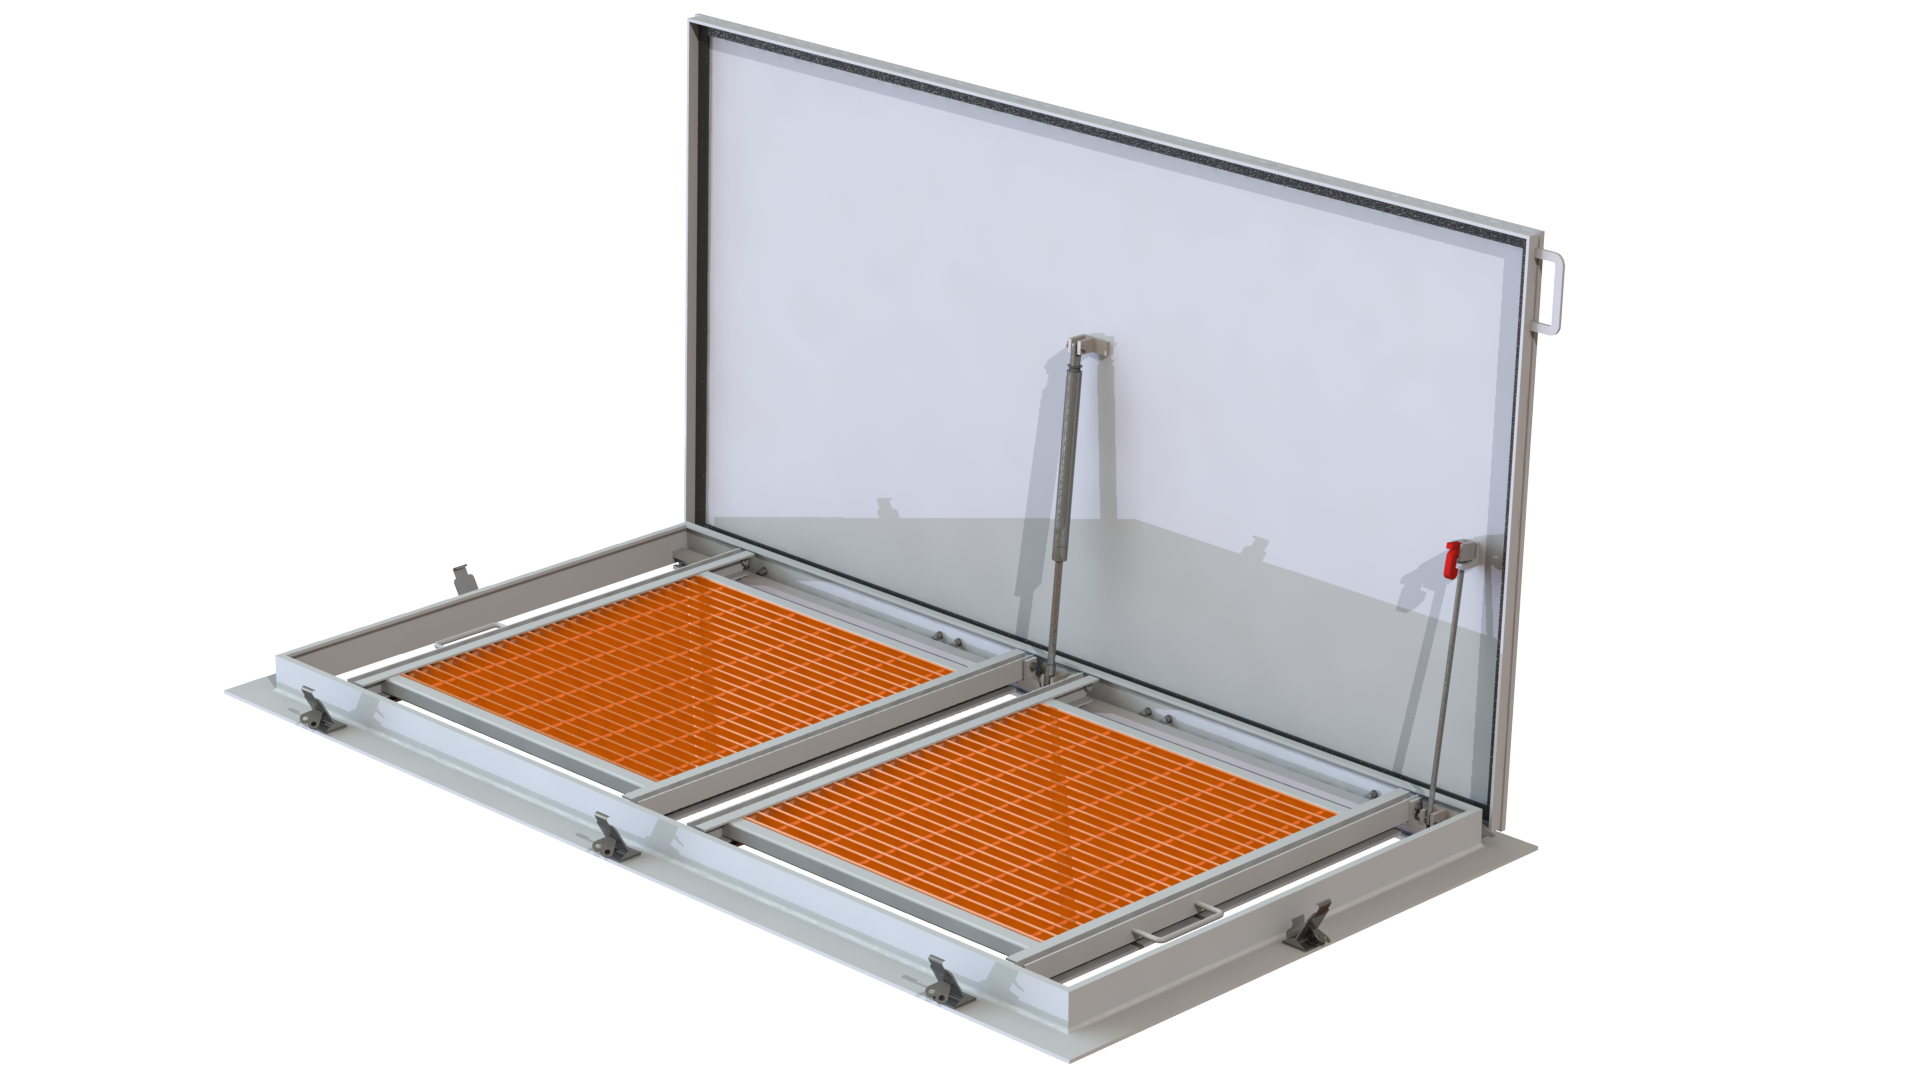 Water Reservoir Access Covers (Halliday)